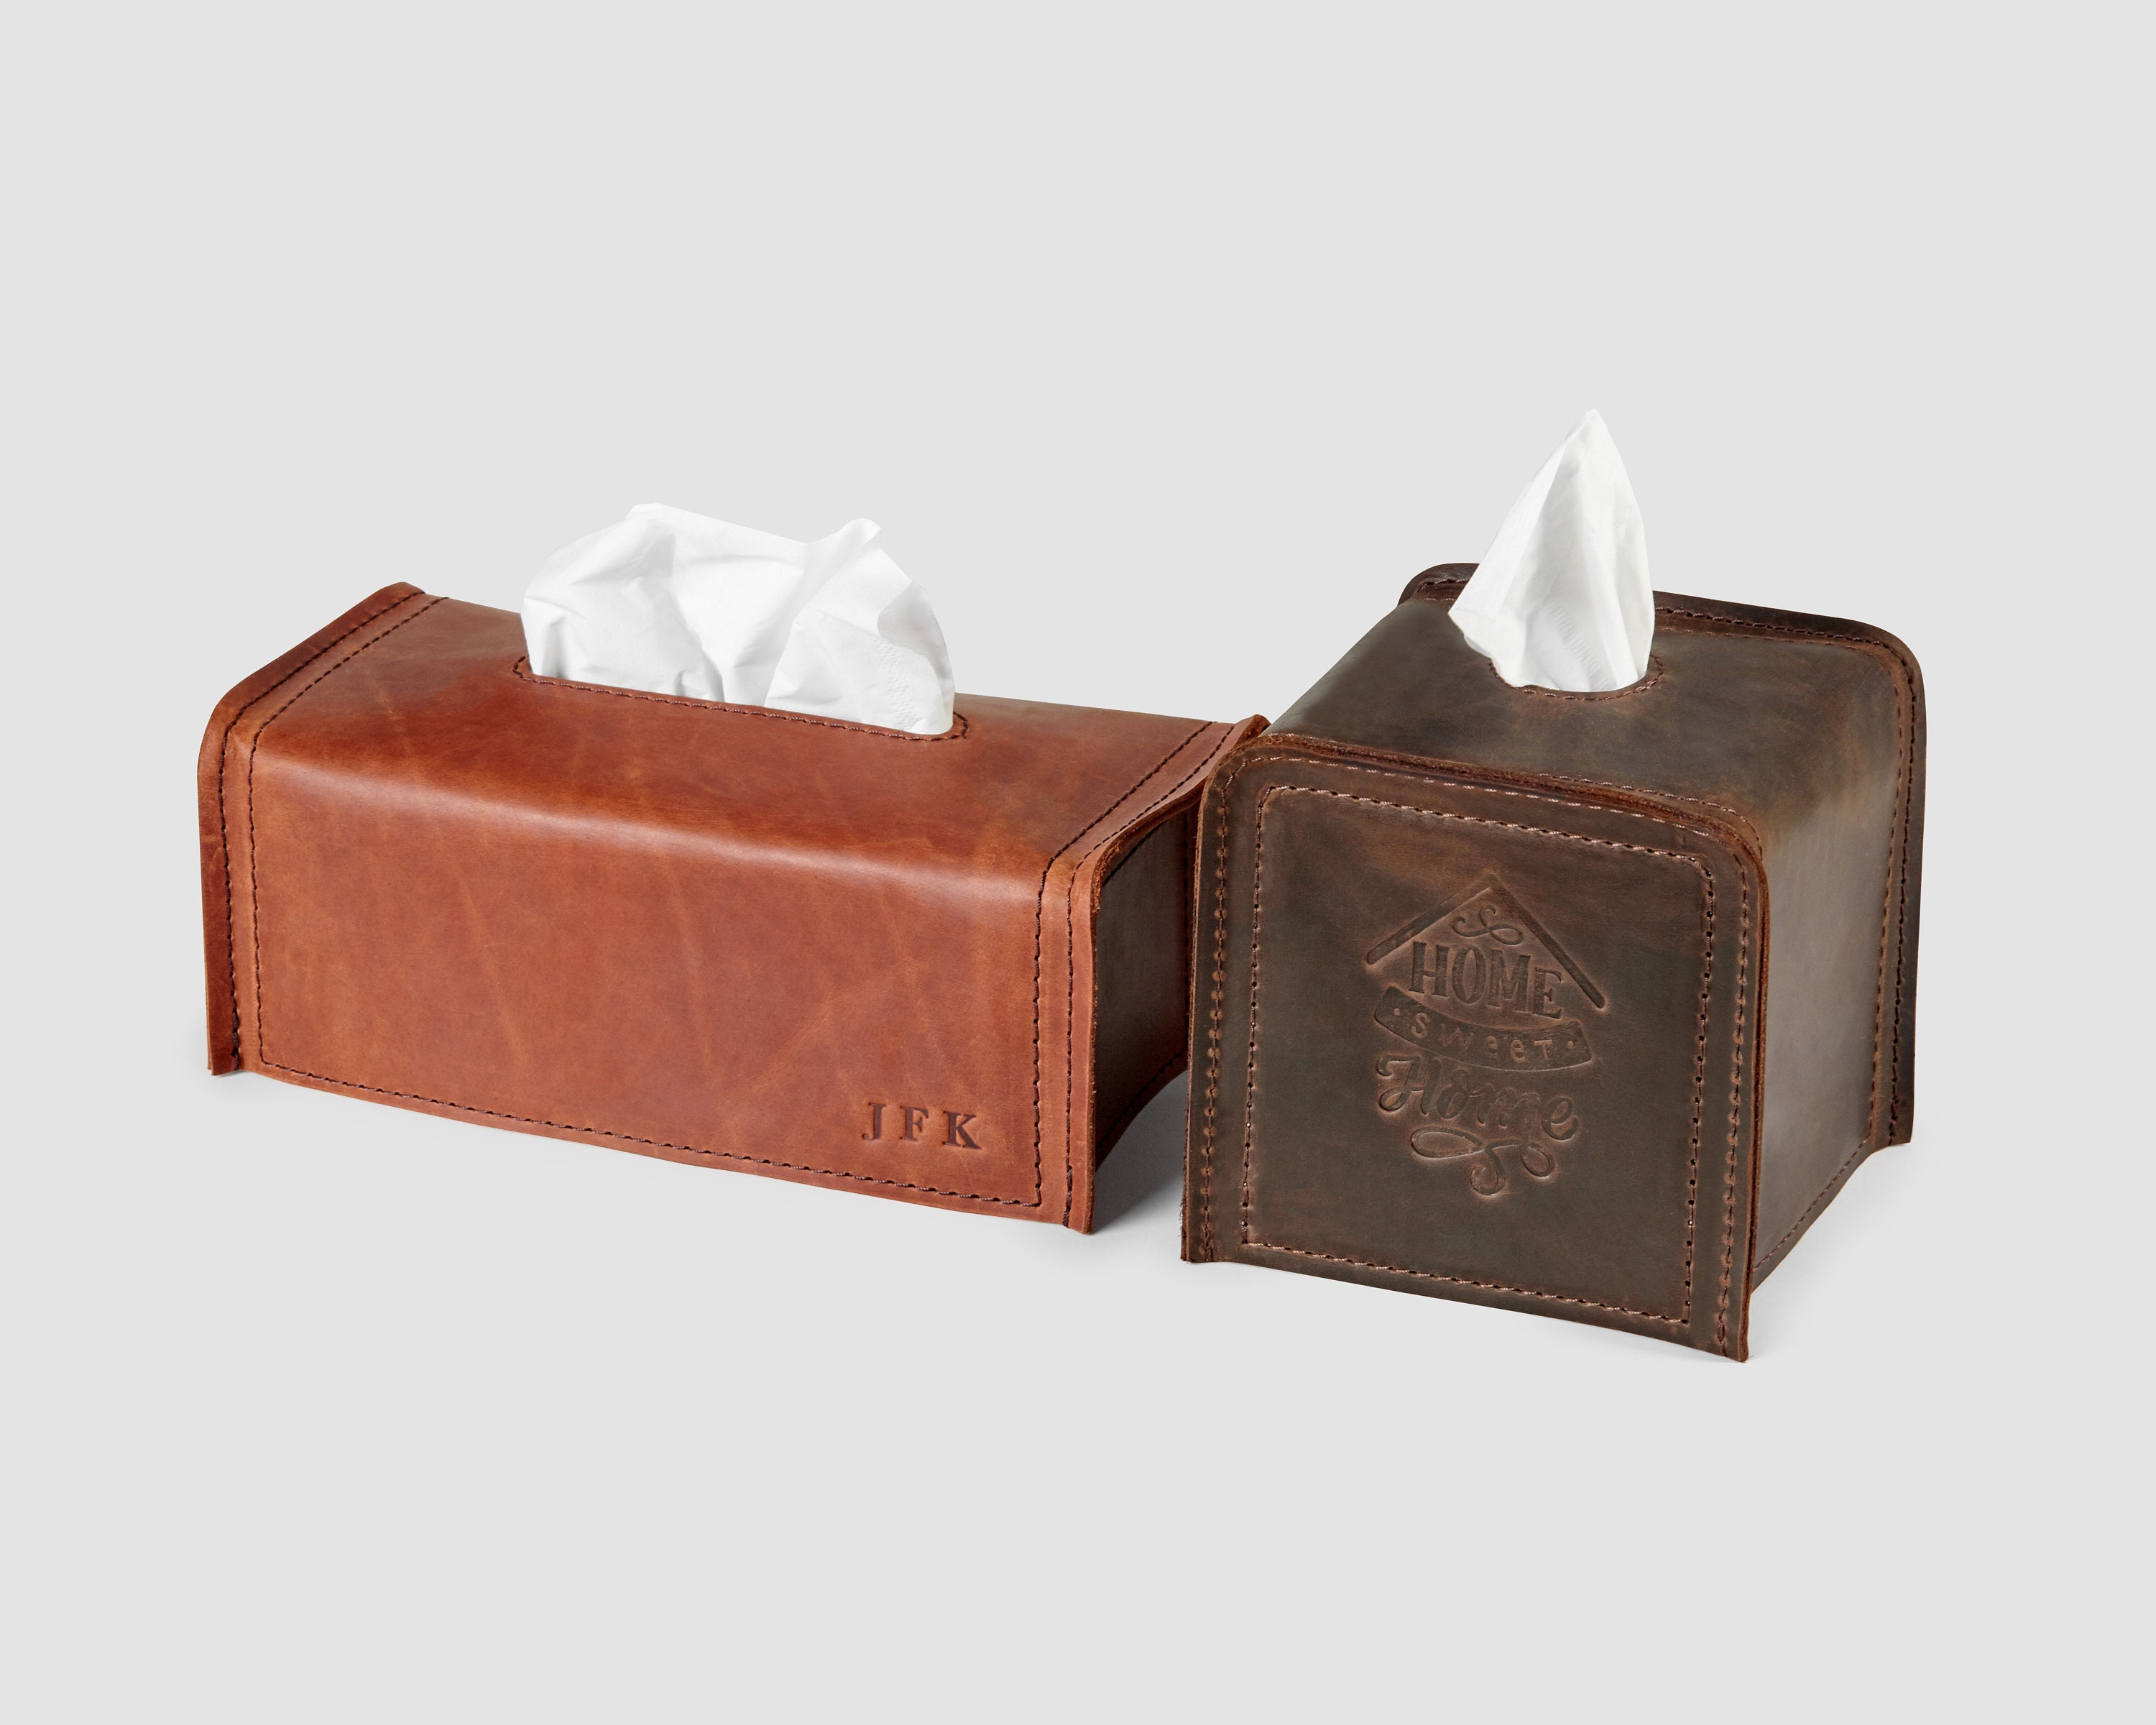 eamqrkt Tissue Box Holder Case Cover Square Carved Pattern Decoration for Home Office Hotel 